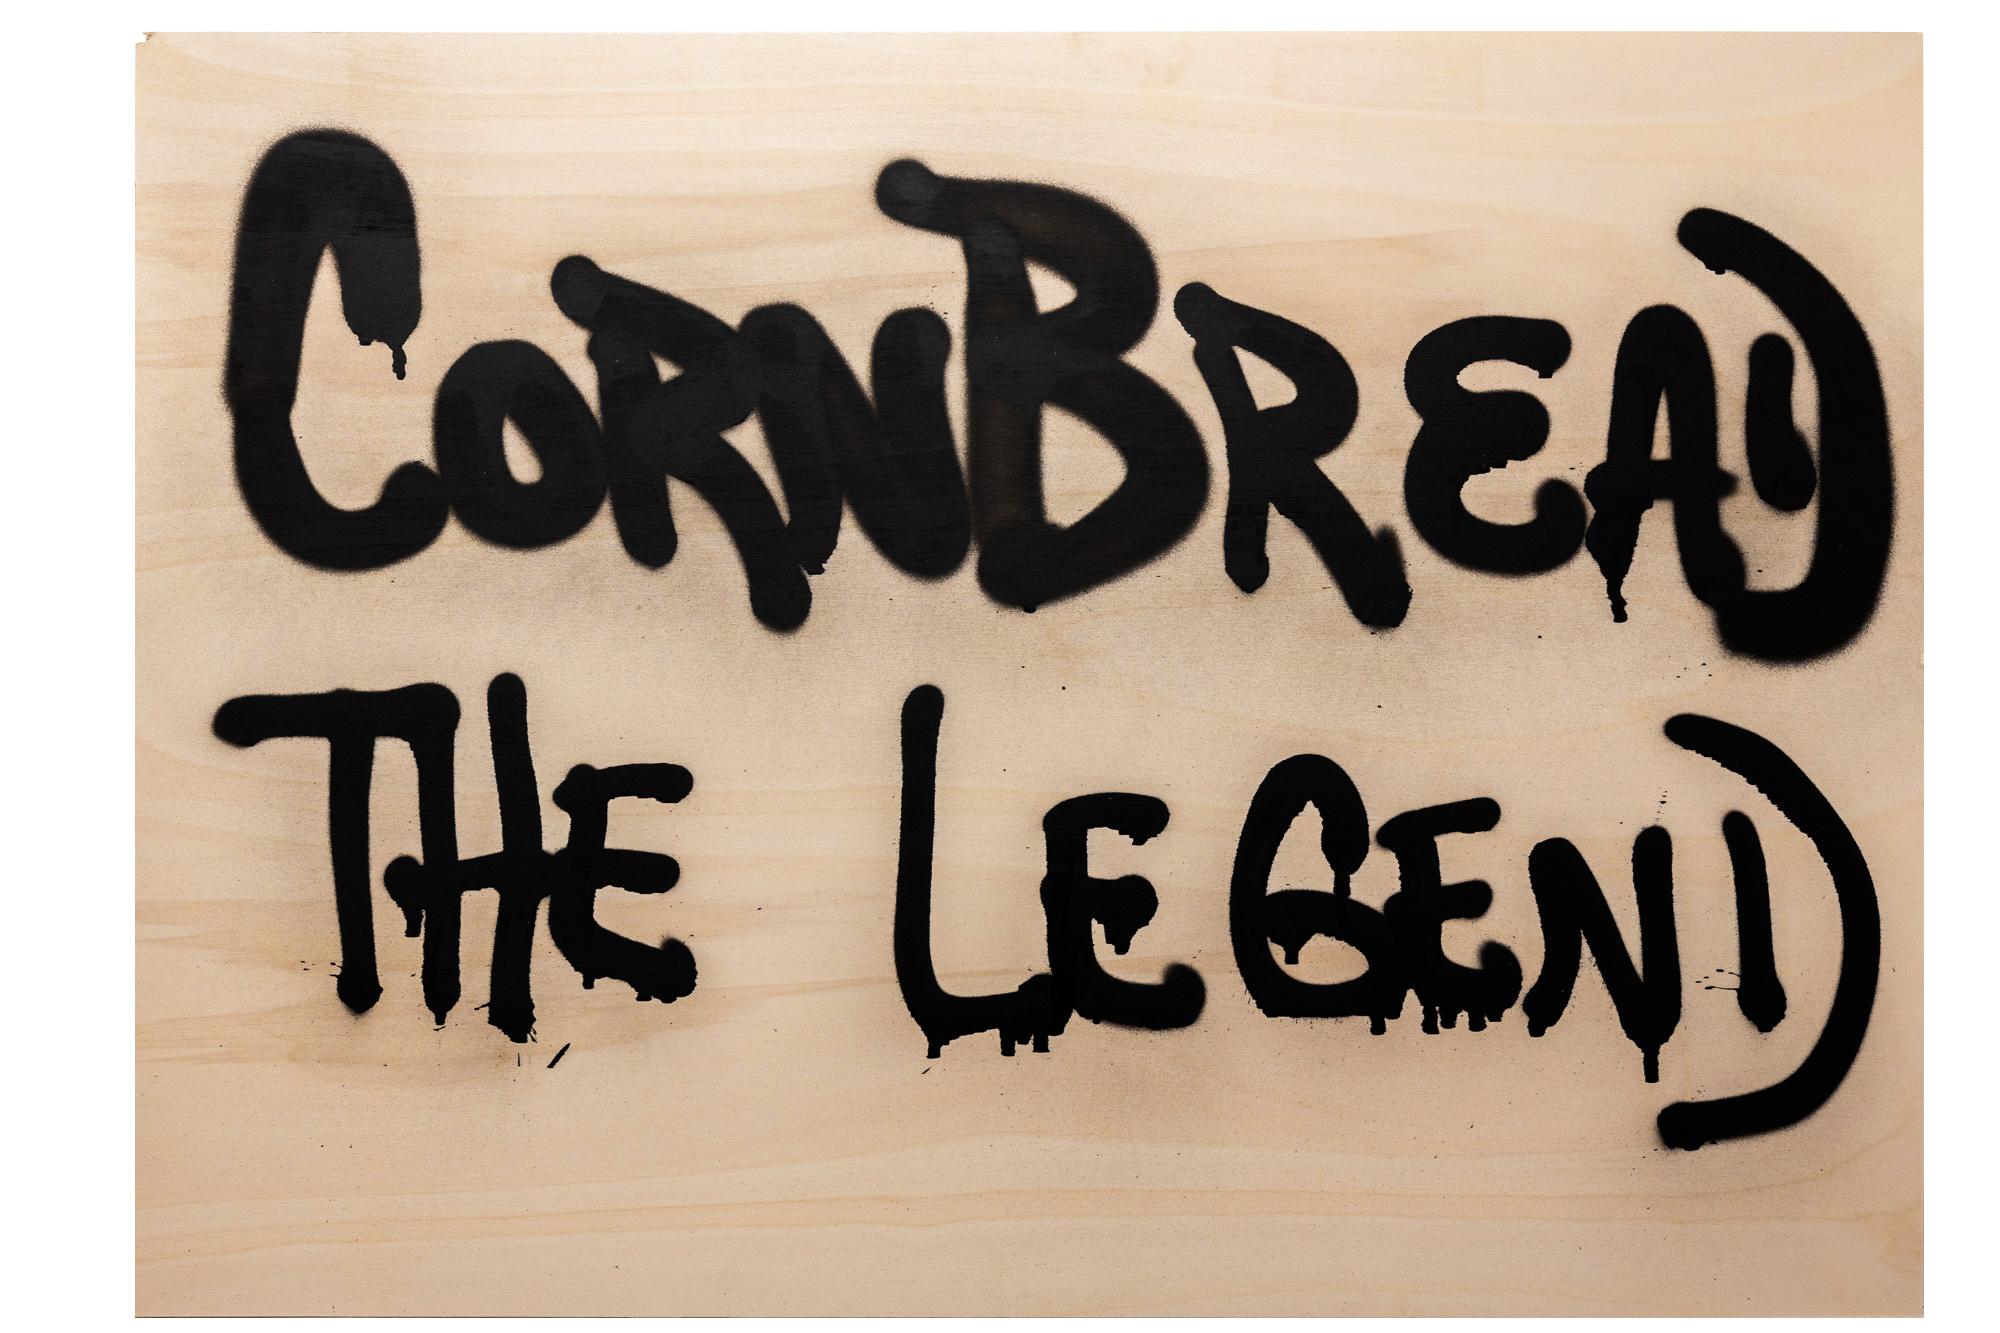 This artwork titled "Fresh Cut: Cornbread the Legend" is an original artwork by Cornbread made of acrylic paint on wood. The piece measures 89.5cm x 125cm / 35.25in x 49.25in unframed, and is shipped unframed.

Darryl McCray, known by his tagging